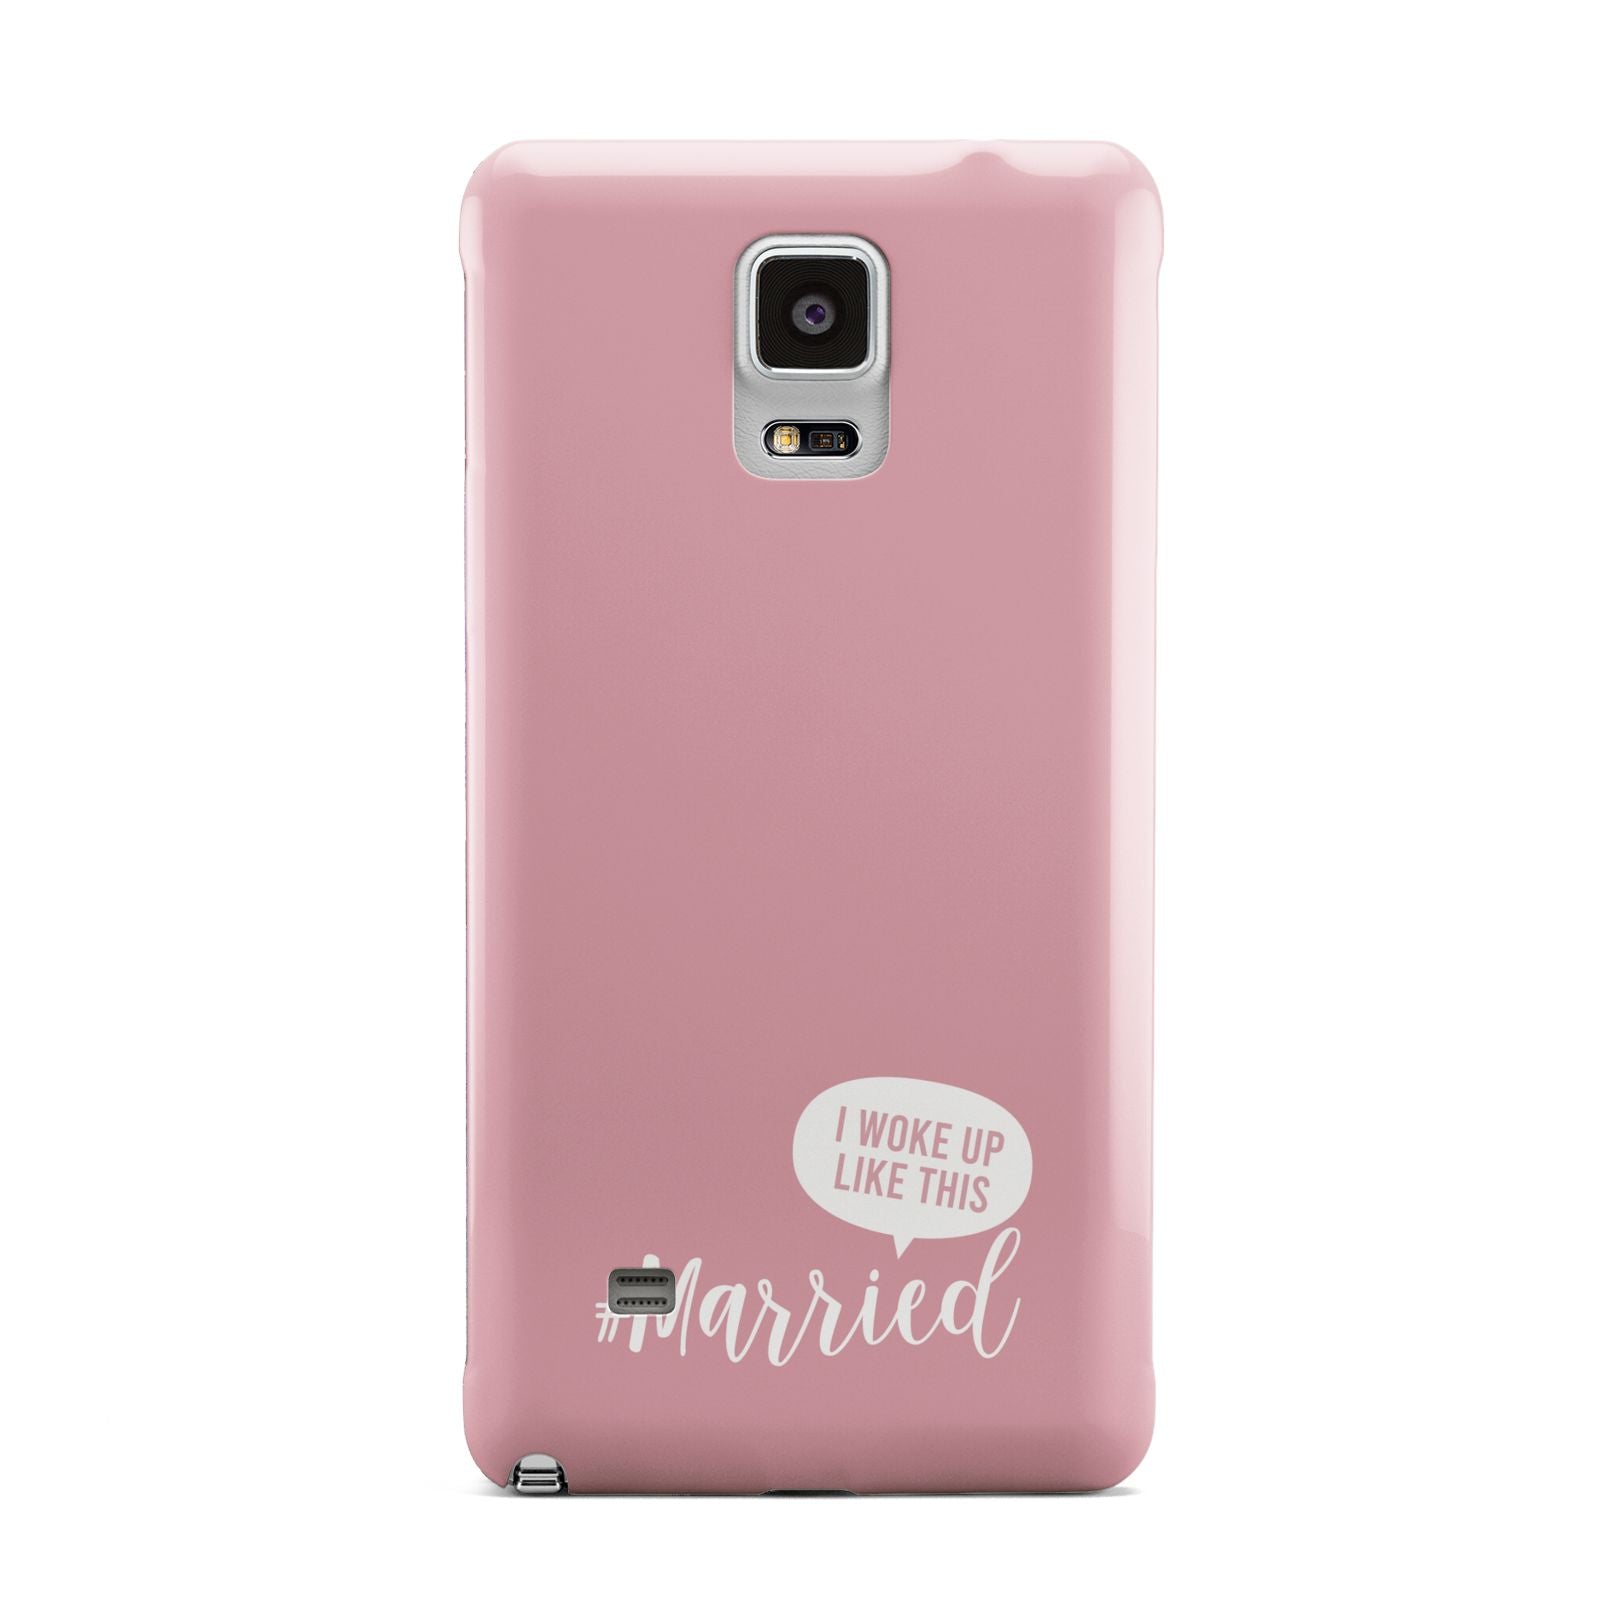 I Woke Up Like This Married Samsung Galaxy Note 4 Case